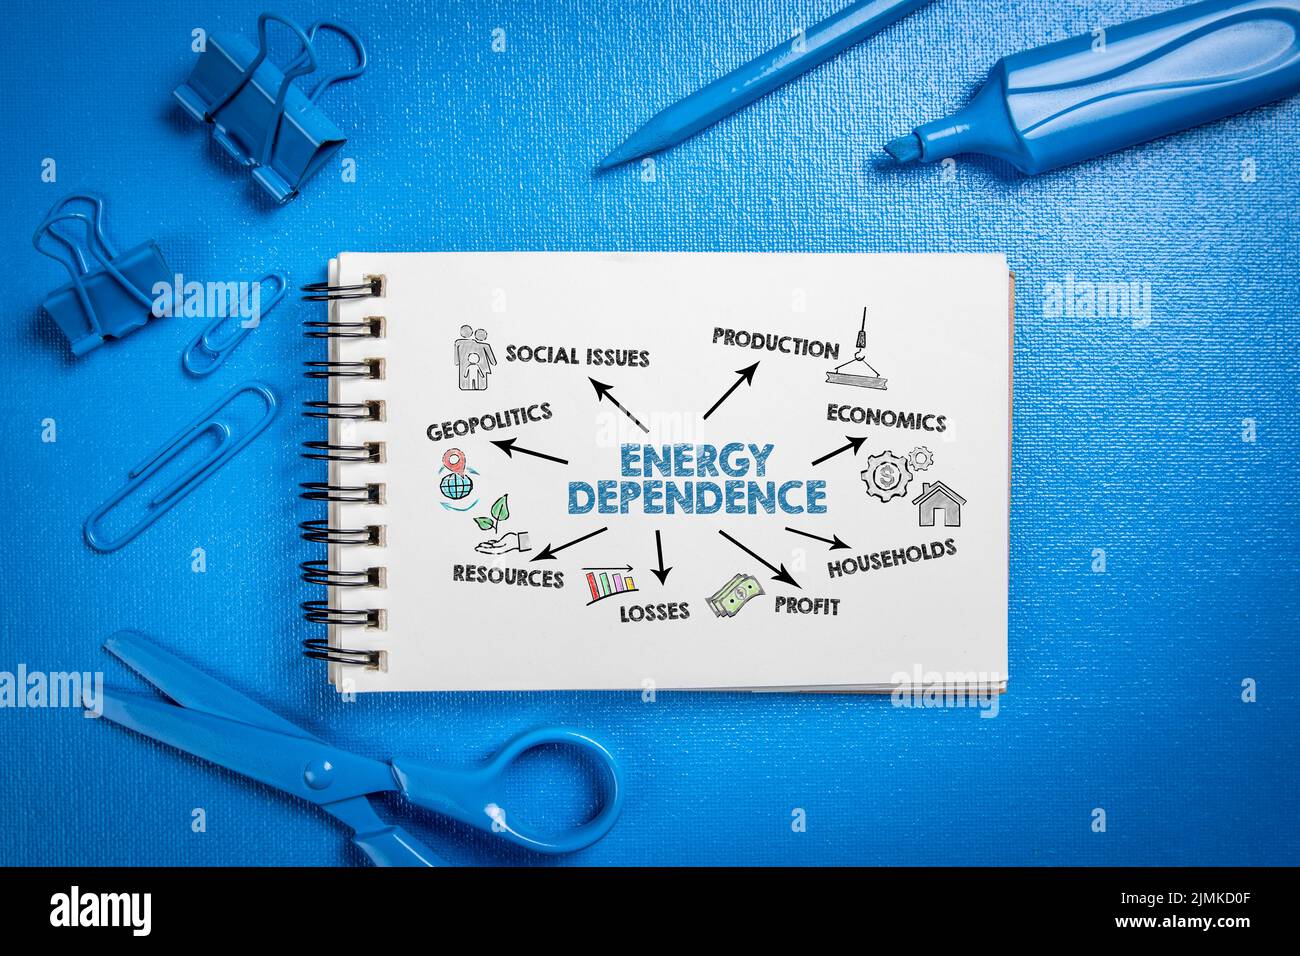 Energy Dependence. Office objects on a blue background. Stock Photo